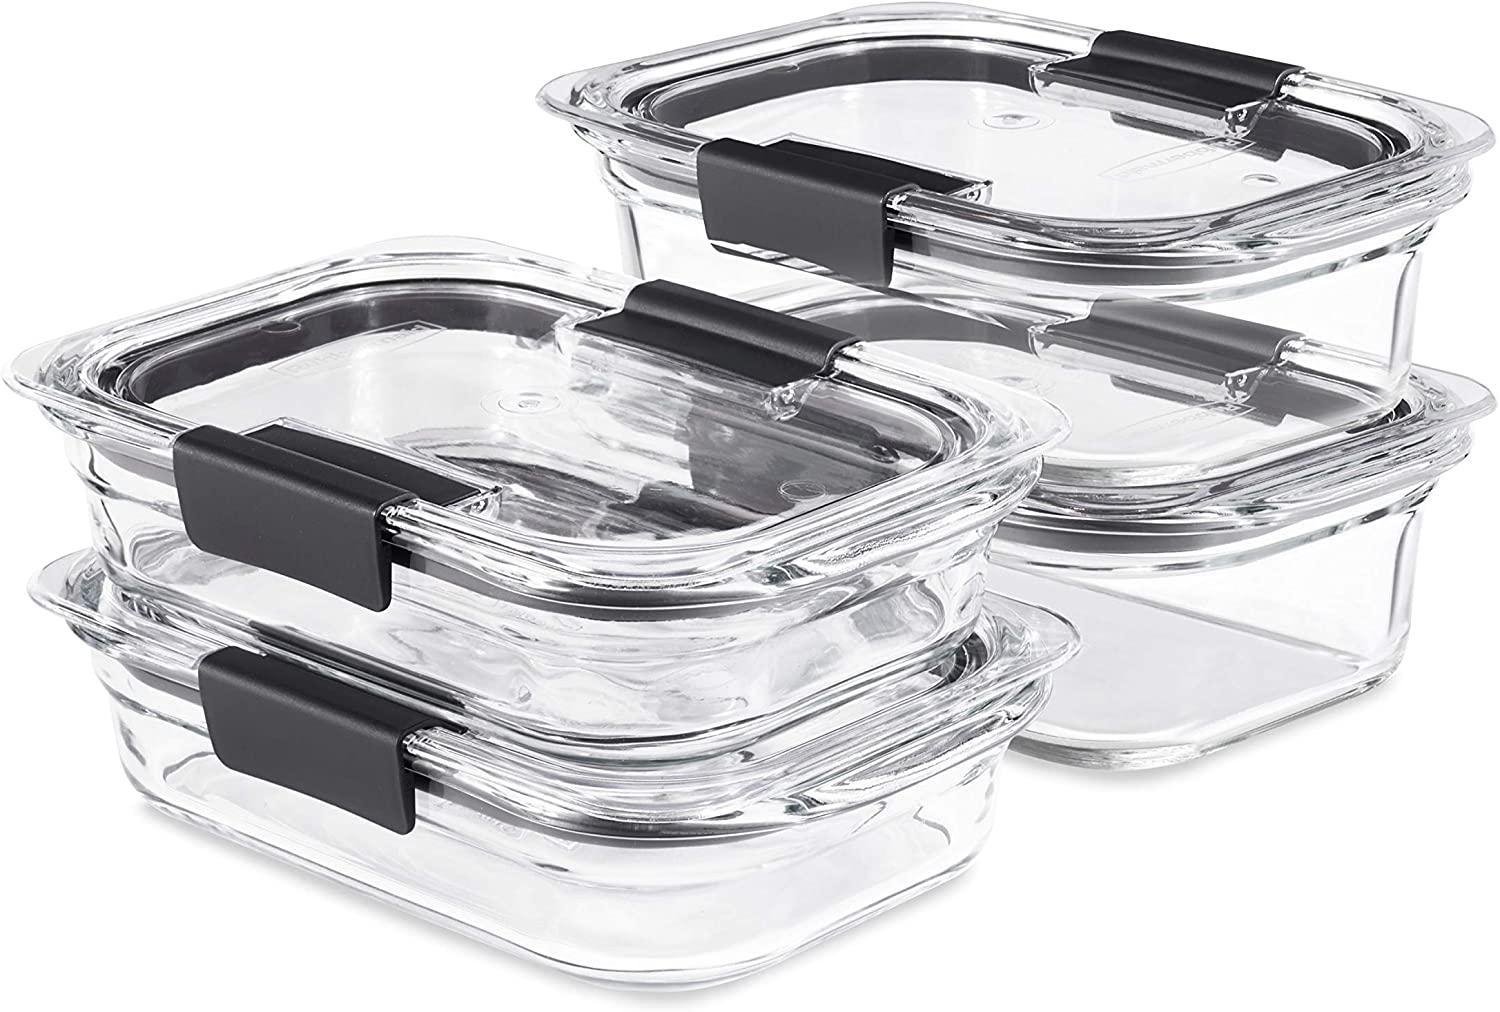 Rubbermaid Brilliance Glass Storage Set 4 Food Containers for $29.01 Shipped